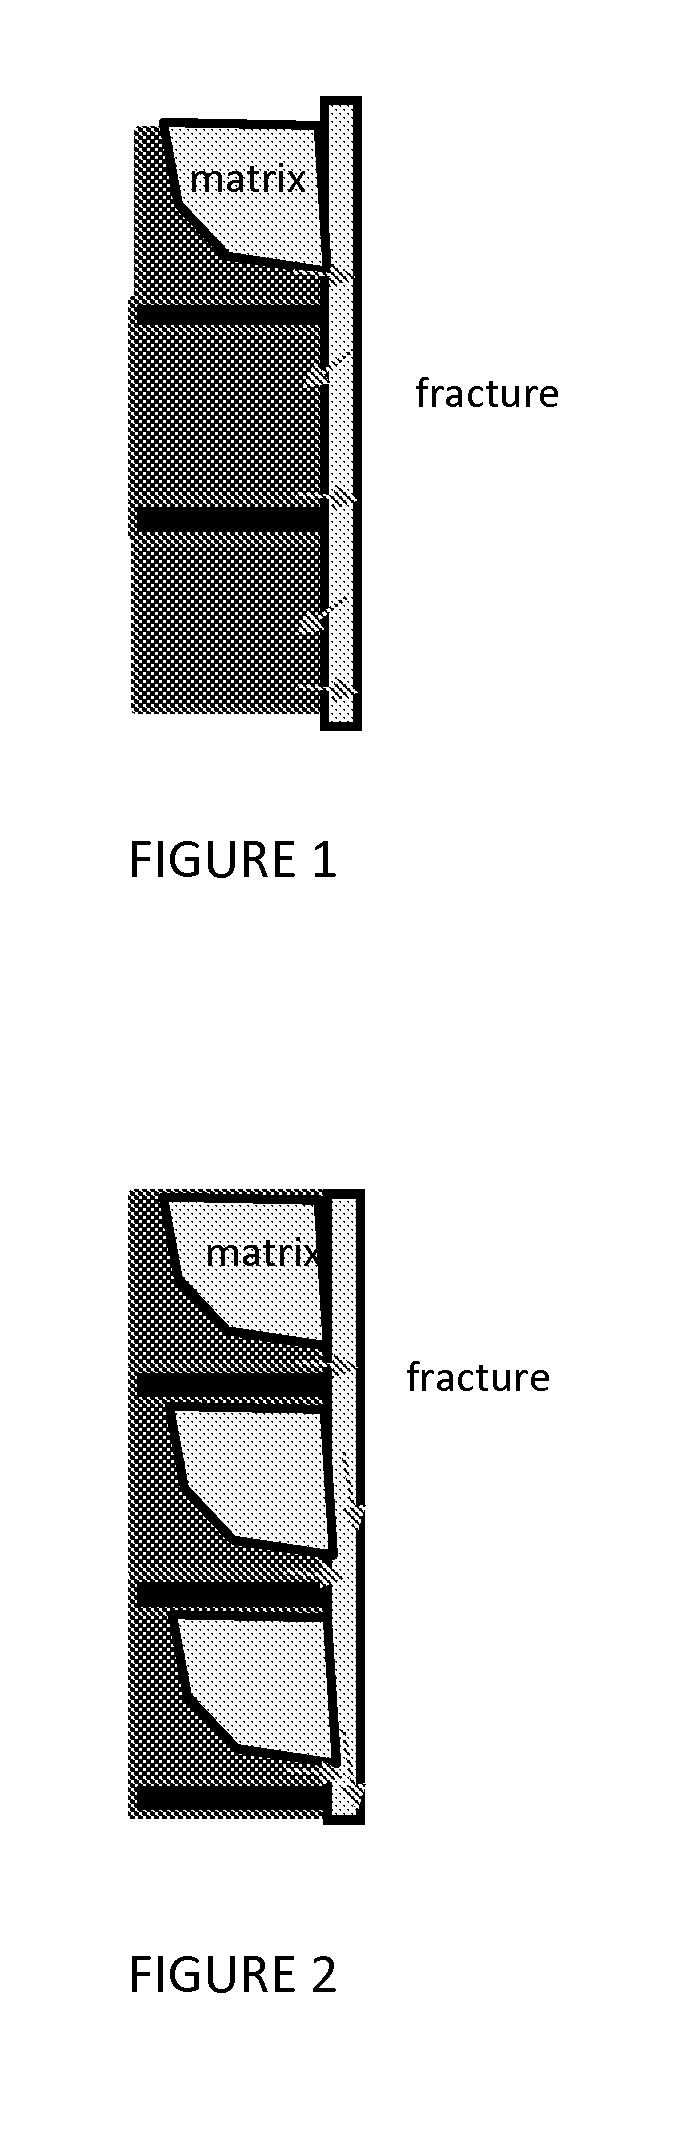 Method to increase gravity drainage rate in oil-wet/mixed-wet fractured reservoir